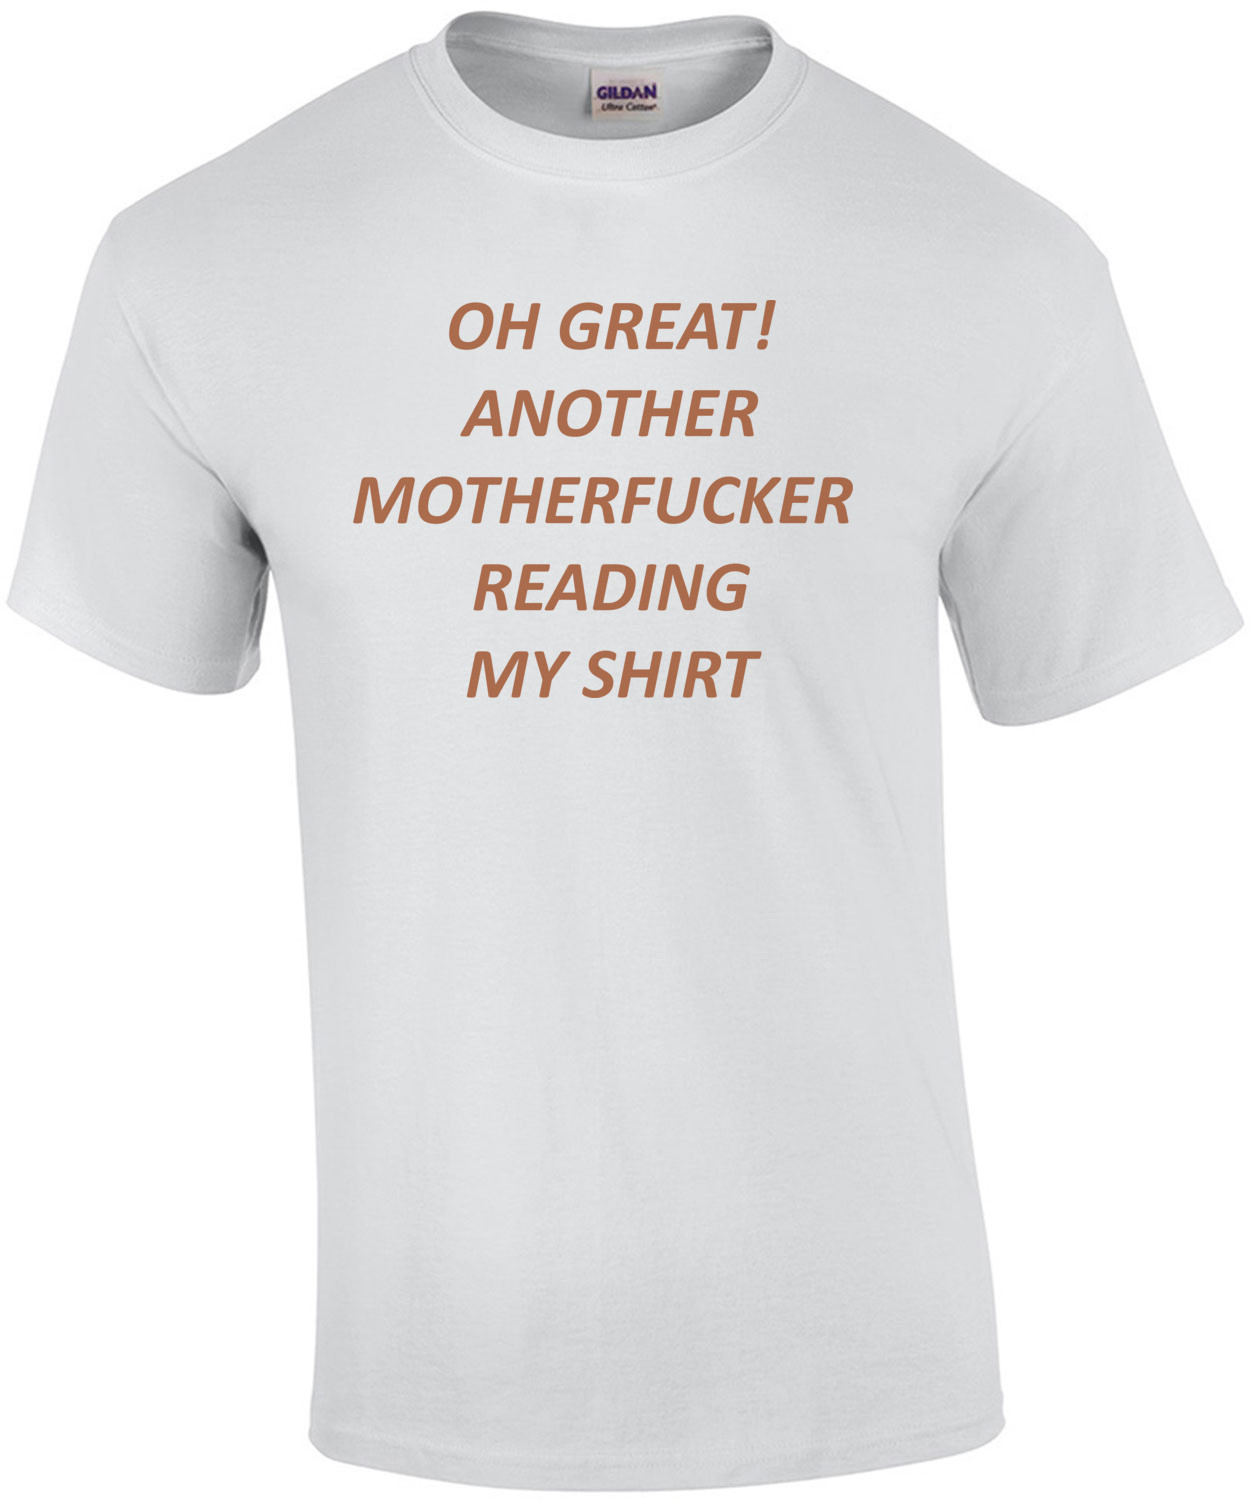 OH GREAT! ANOTHER MOTHERFUCKER READING MY SHIRT. Shirt